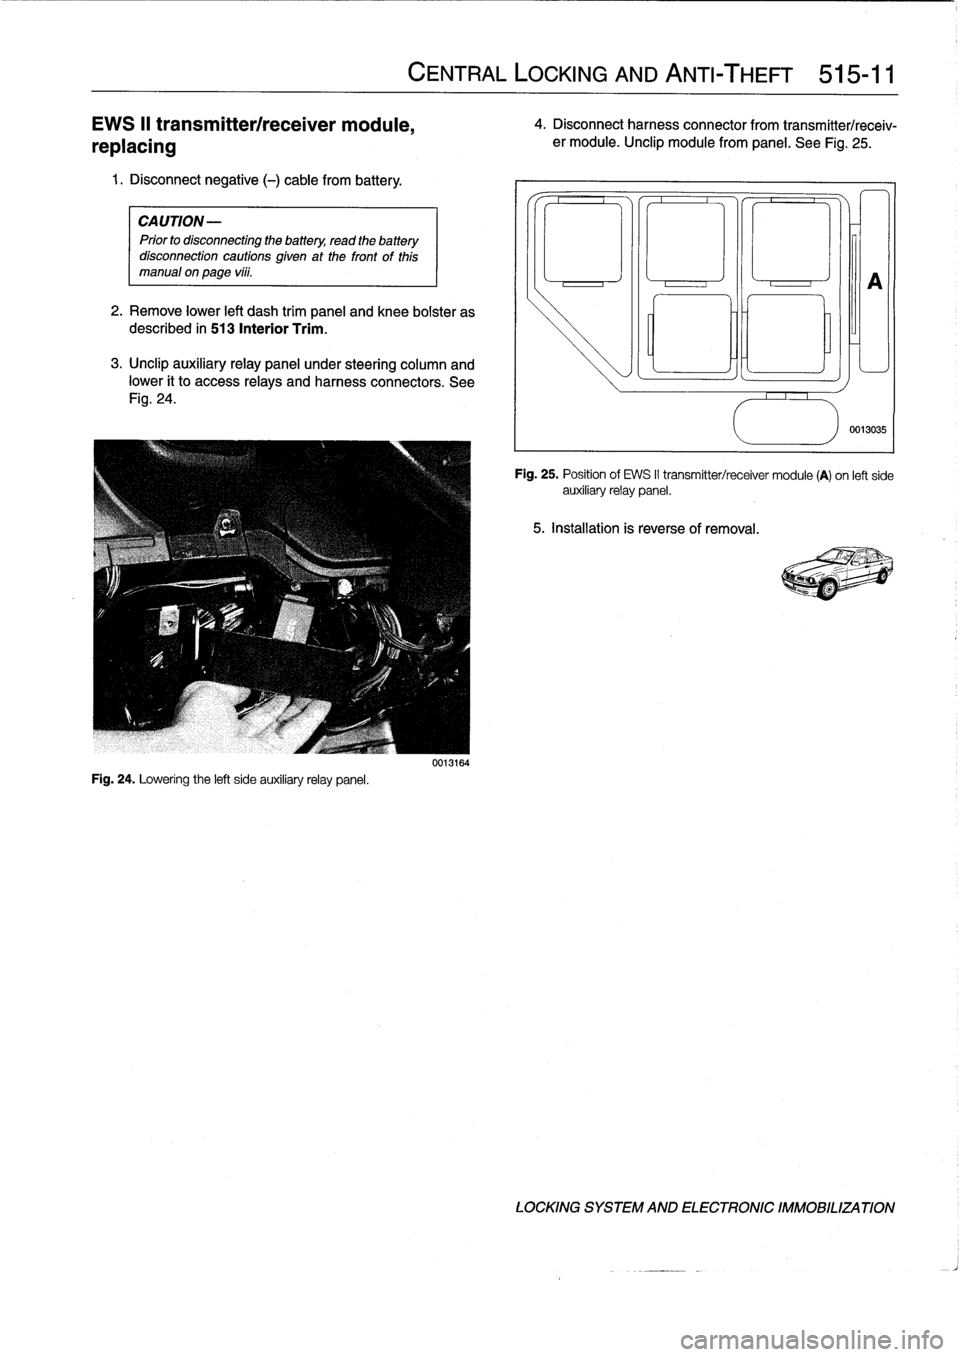 BMW 323i 1998 E36 Workshop Manual 
EWS
II
transmitterlreceiver
module,

replacing

1
.
Disconnect
negative
(-)
cable
from
battery
.

CAUTION-

Prior
to
disconnectiog
the
battery,
read
the
battery
disconnection
cautions
given
at
the
fr